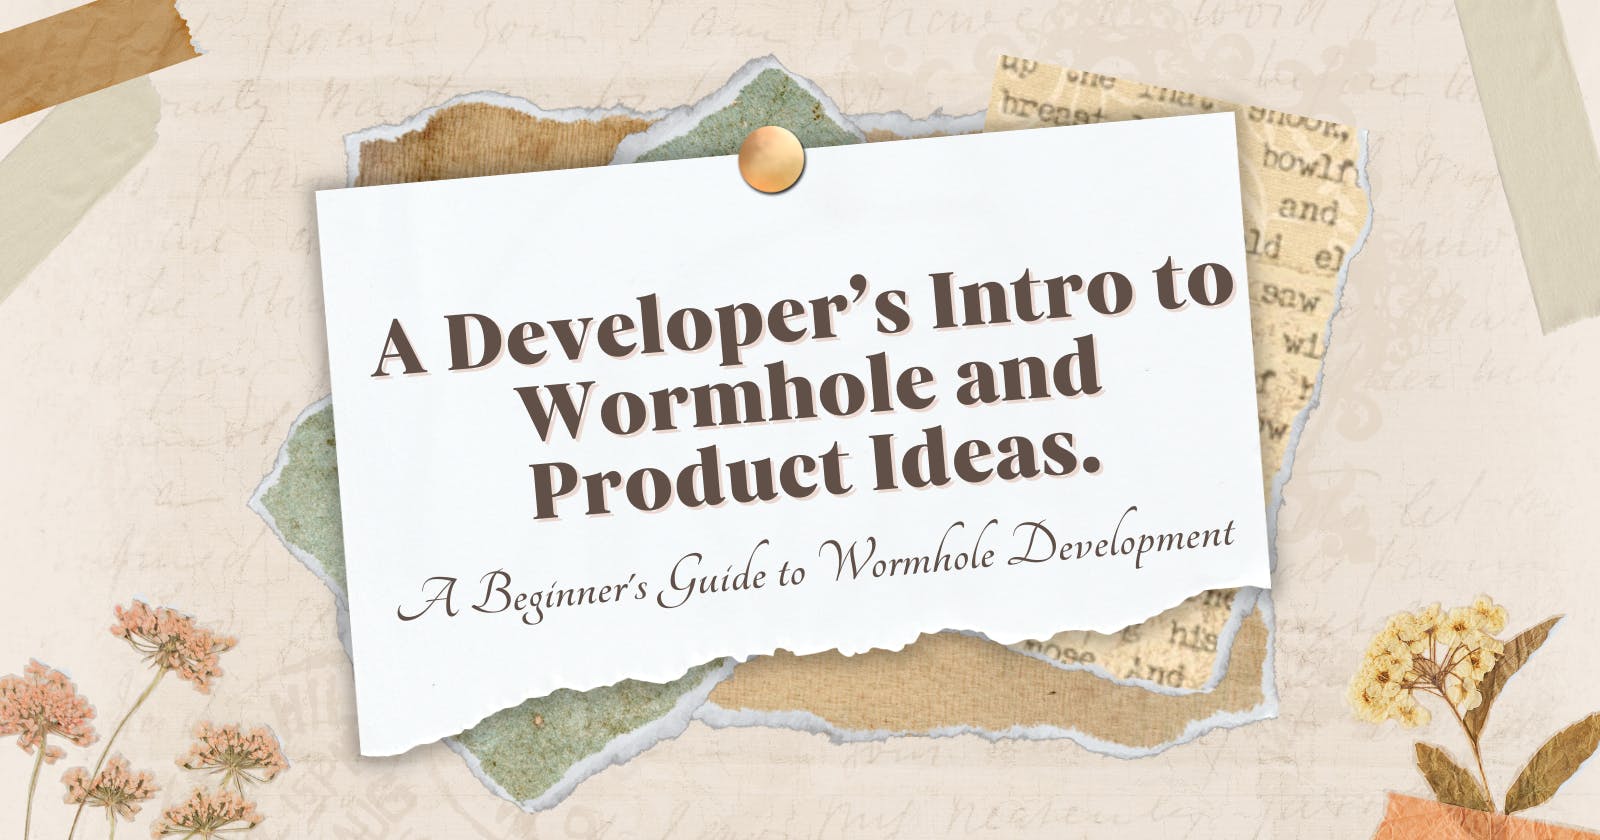 A Developer’s Intro to Wormhole and Product Ideas.